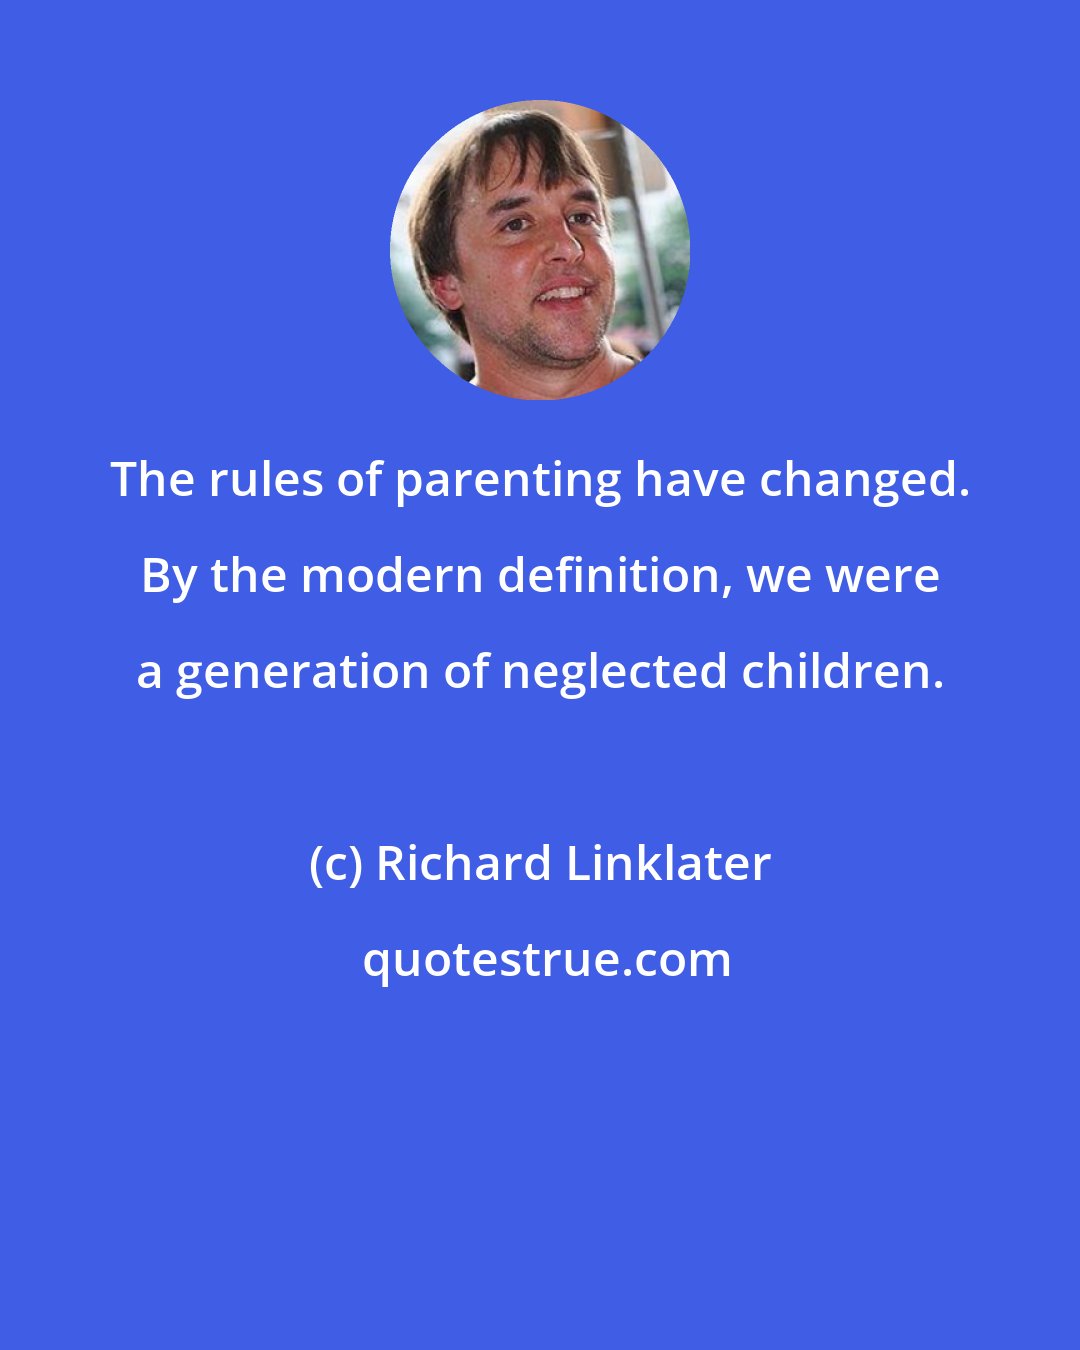 Richard Linklater: The rules of parenting have changed. By the modern definition, we were a generation of neglected children.